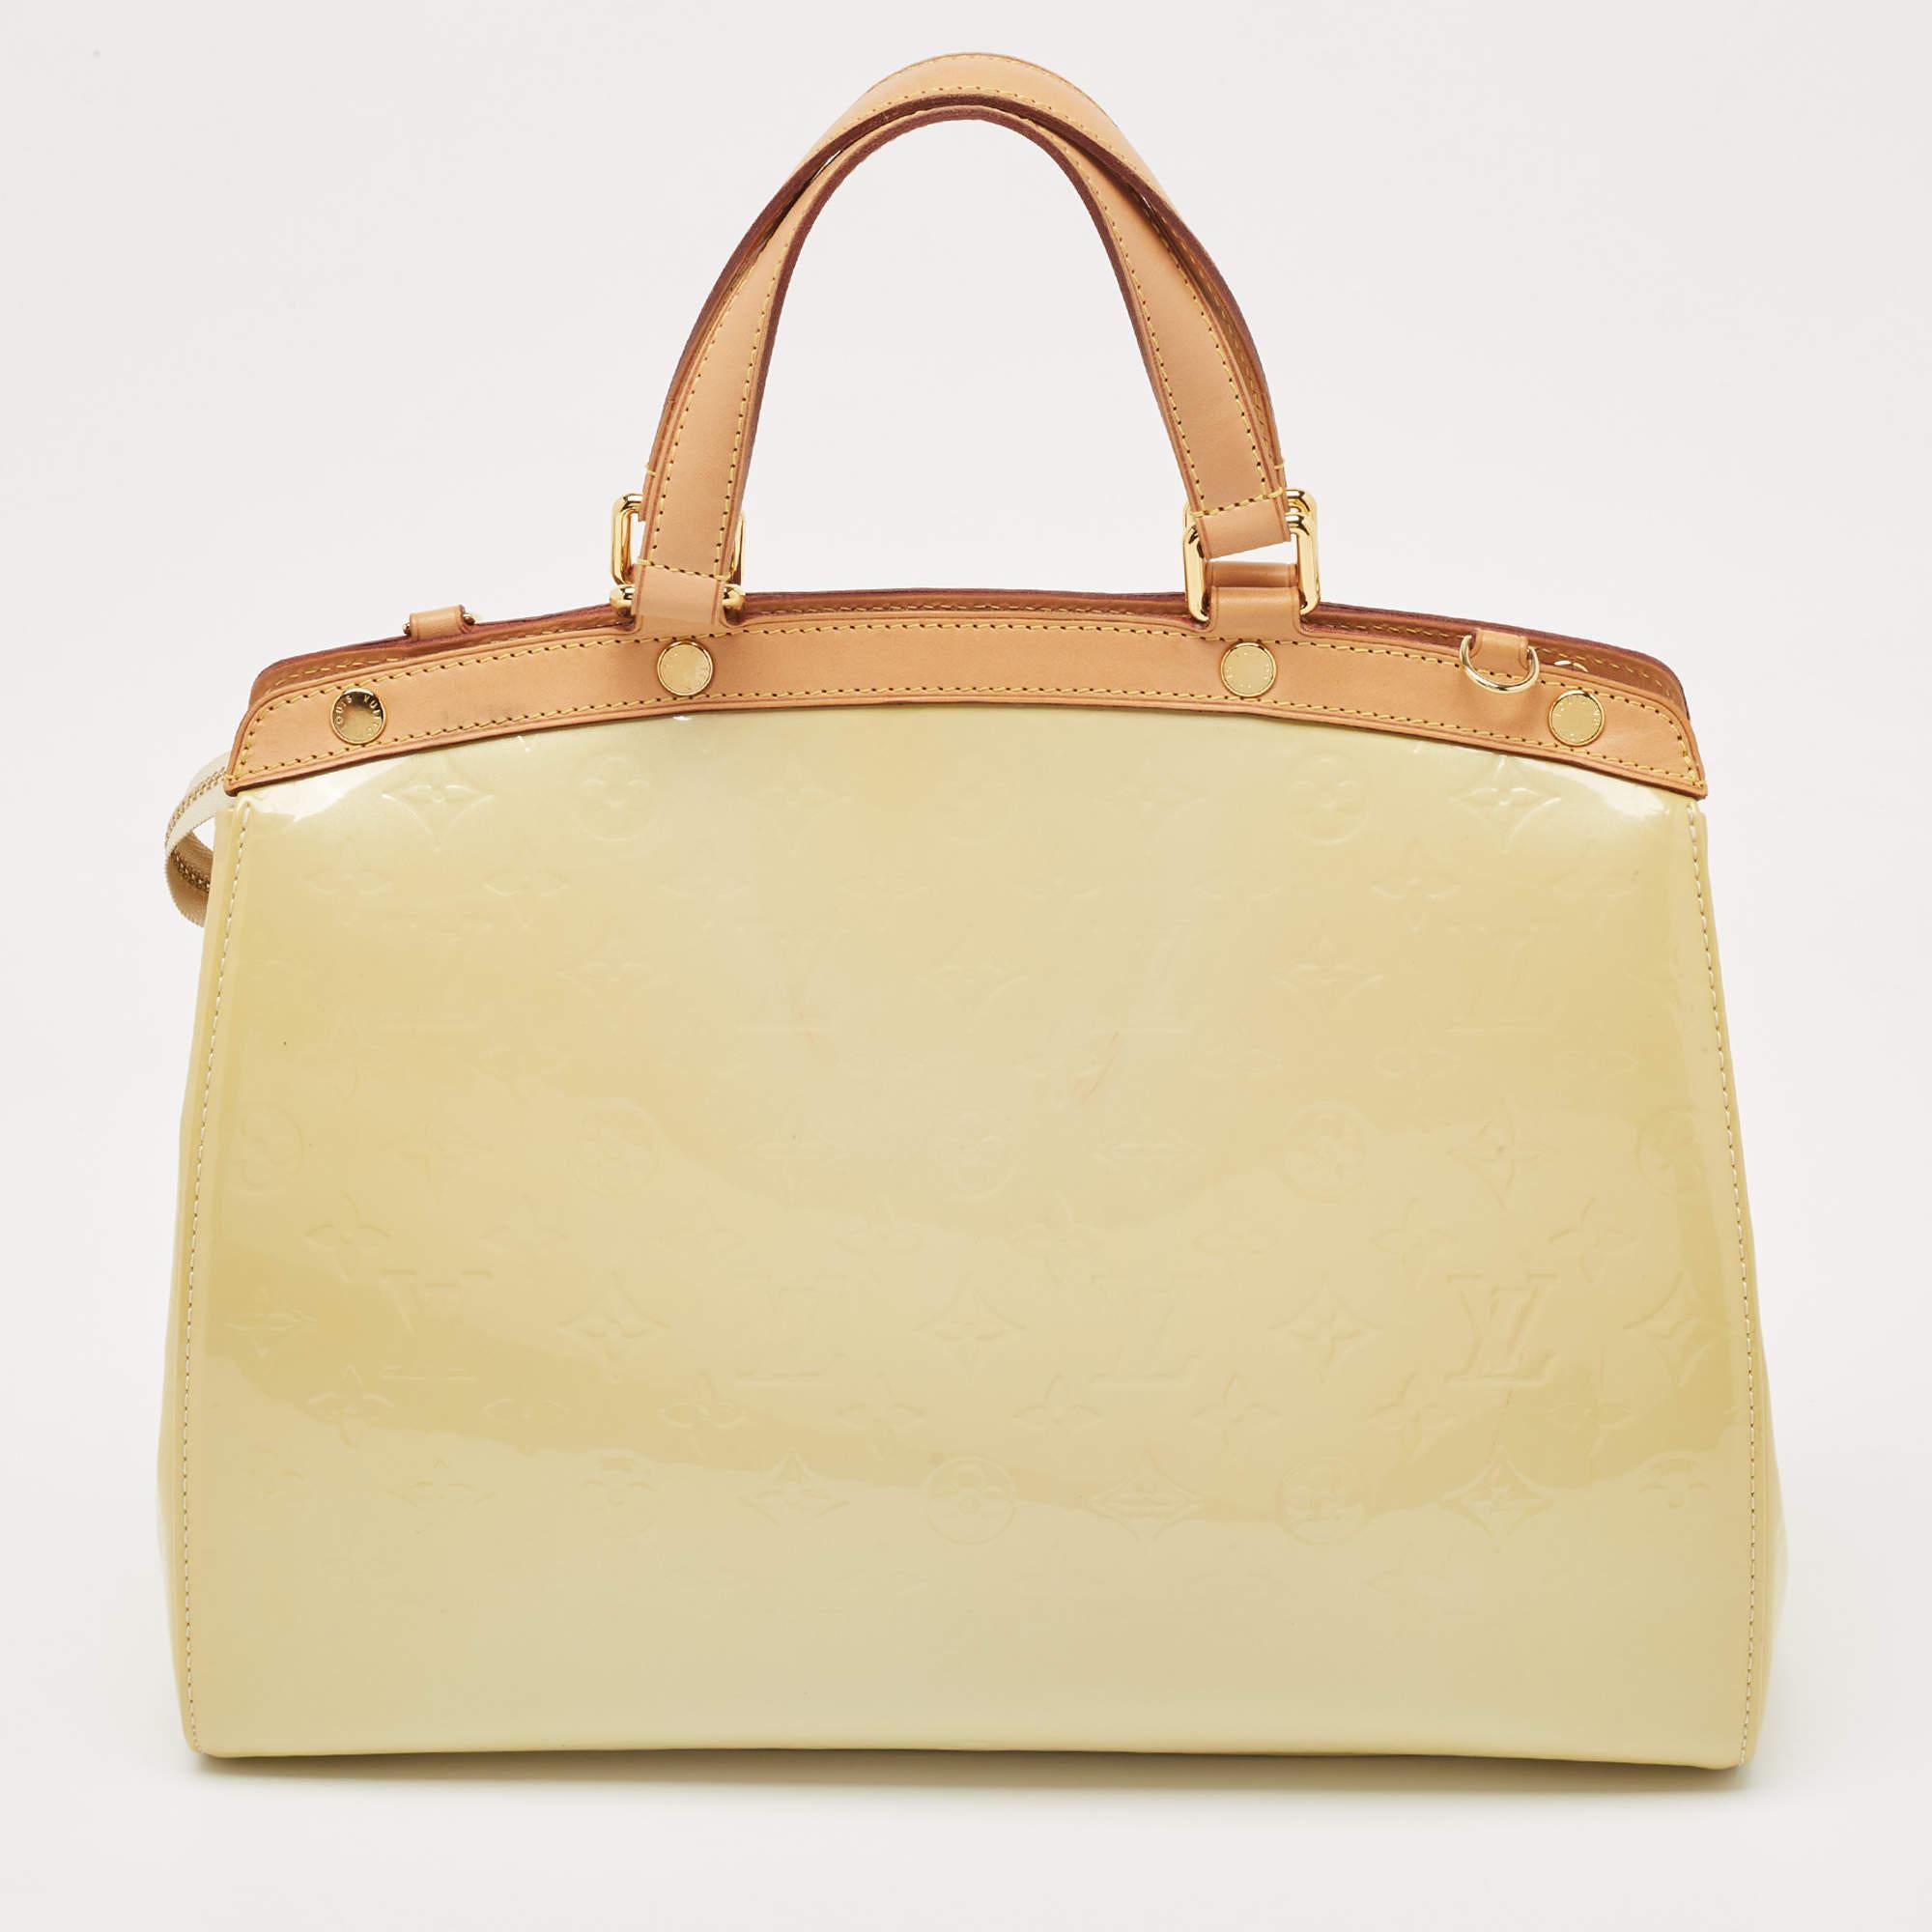 This Brea GM bag from the House of Louis Vuitton will sway you away with its precise shape, style, and design. It is made from Blanc Corail Monogram Vernis into a structured, neat silhouette. It flaunts gold-toned fittings, dual top handles, and a